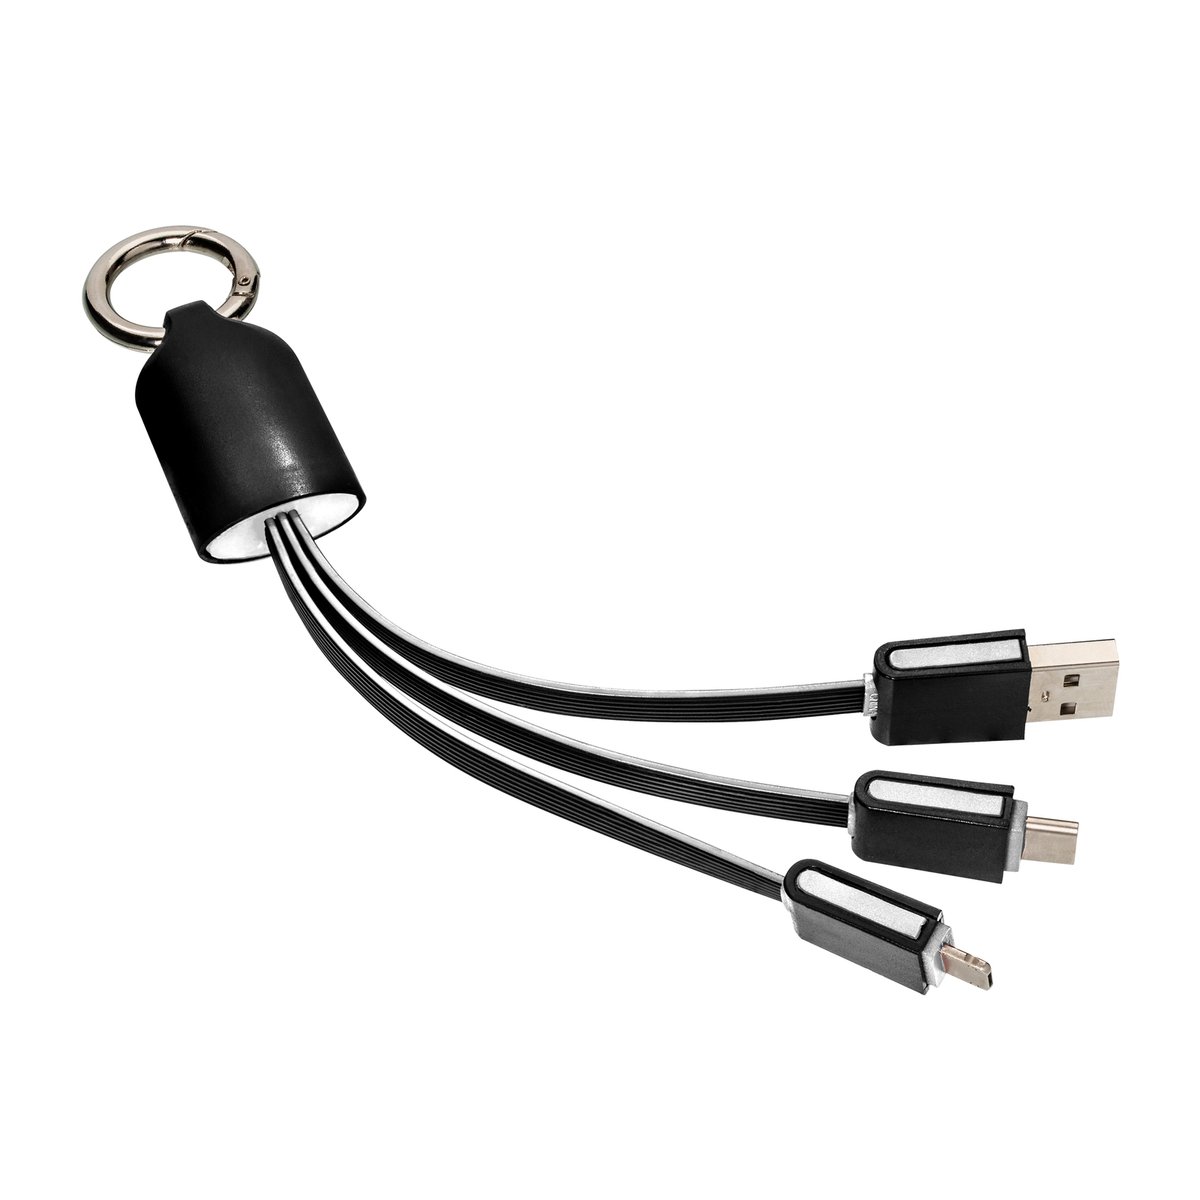 3-in-1 Charging Cable REEVES-ABILENE black/white